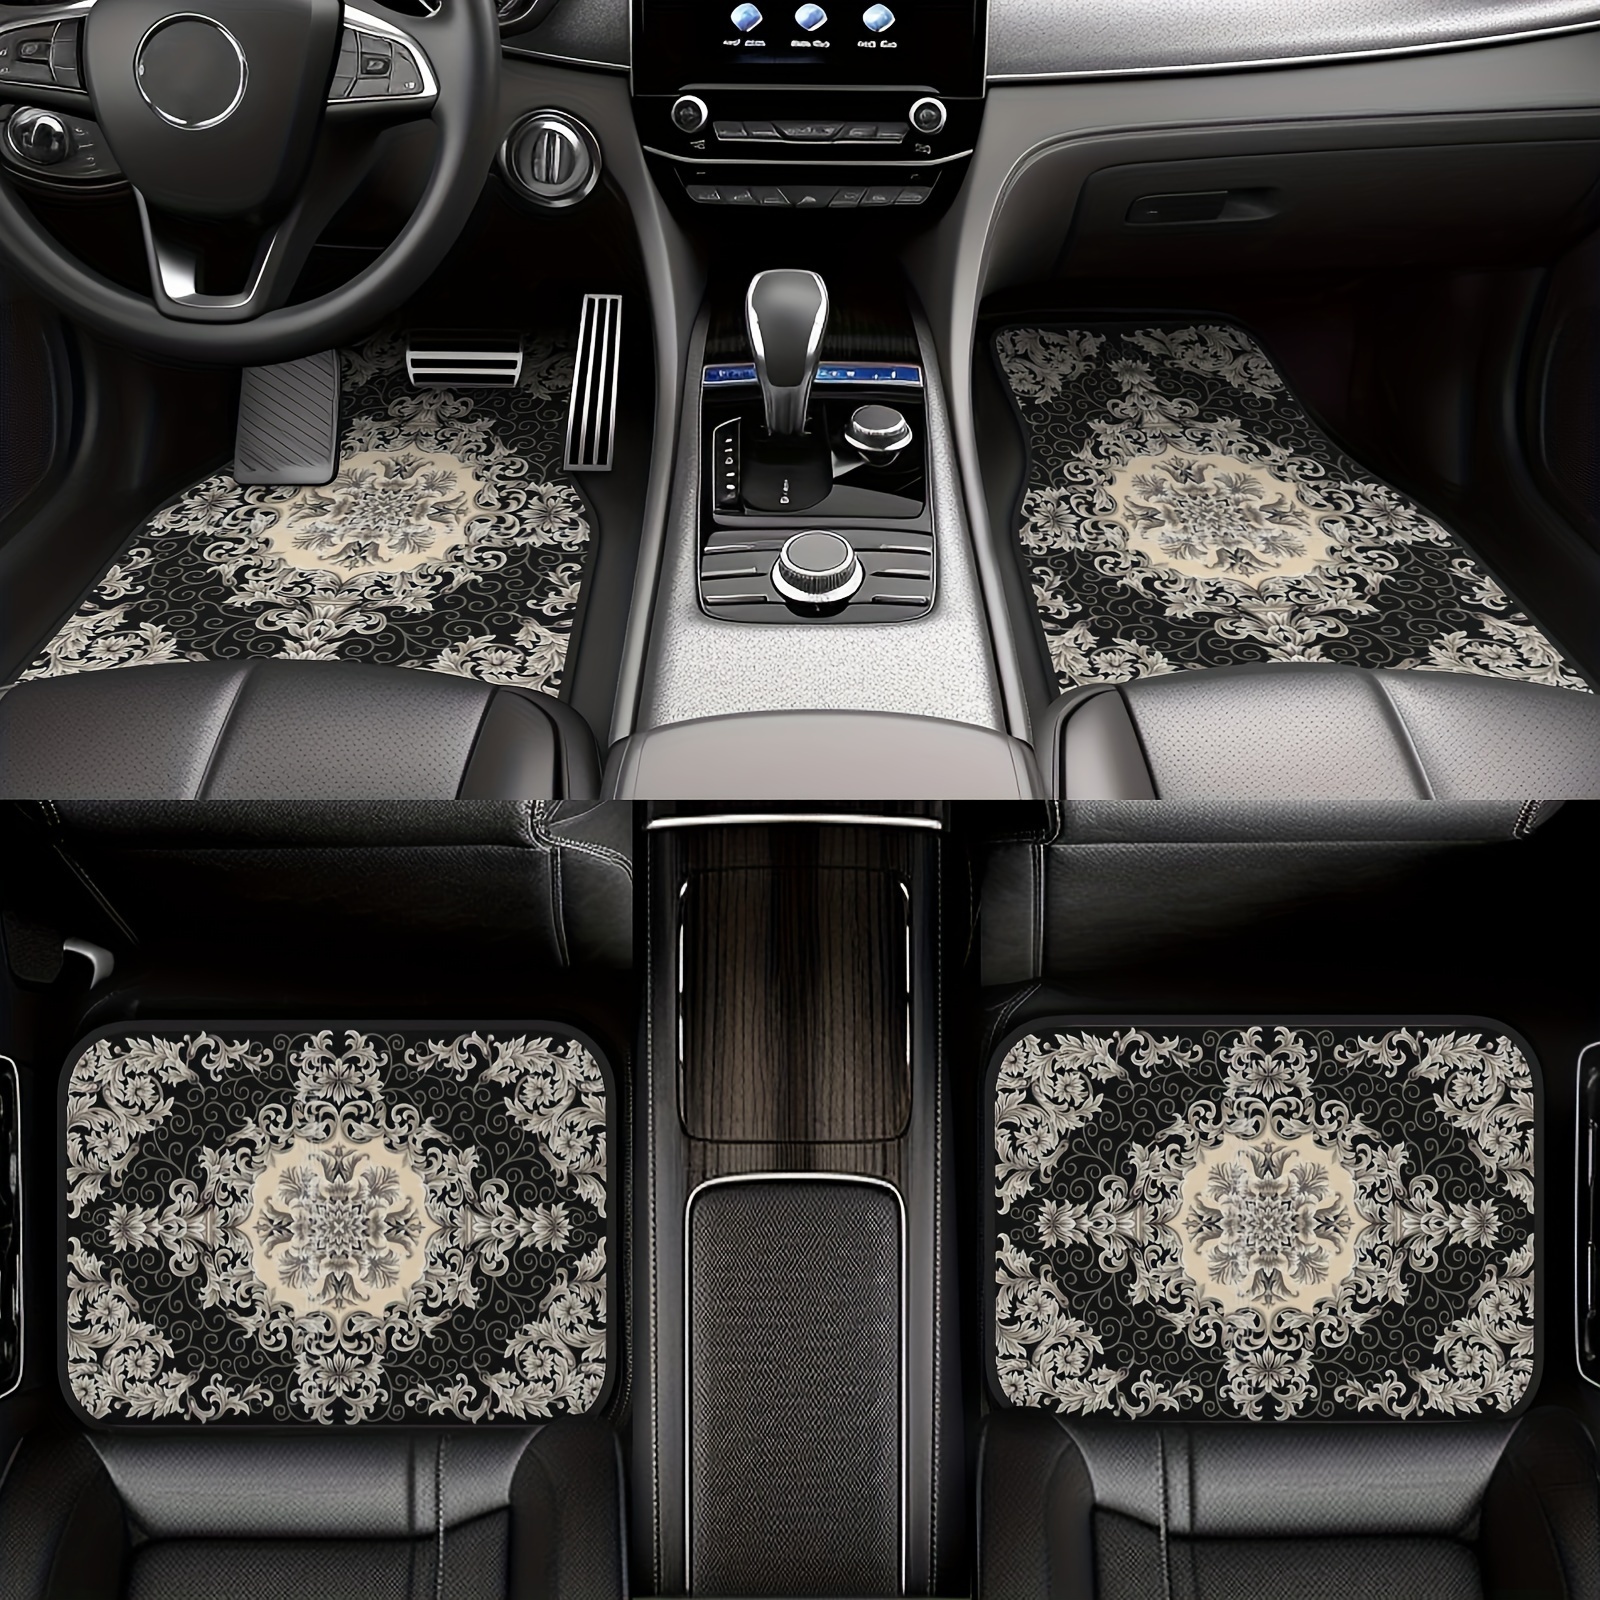 

4 Pcs Vintage European Floral Pattern Car Floor Mats: Suitable For All Seasons, Perfect For Cars, Suvs, And Makes A Great Gift For Men And Women